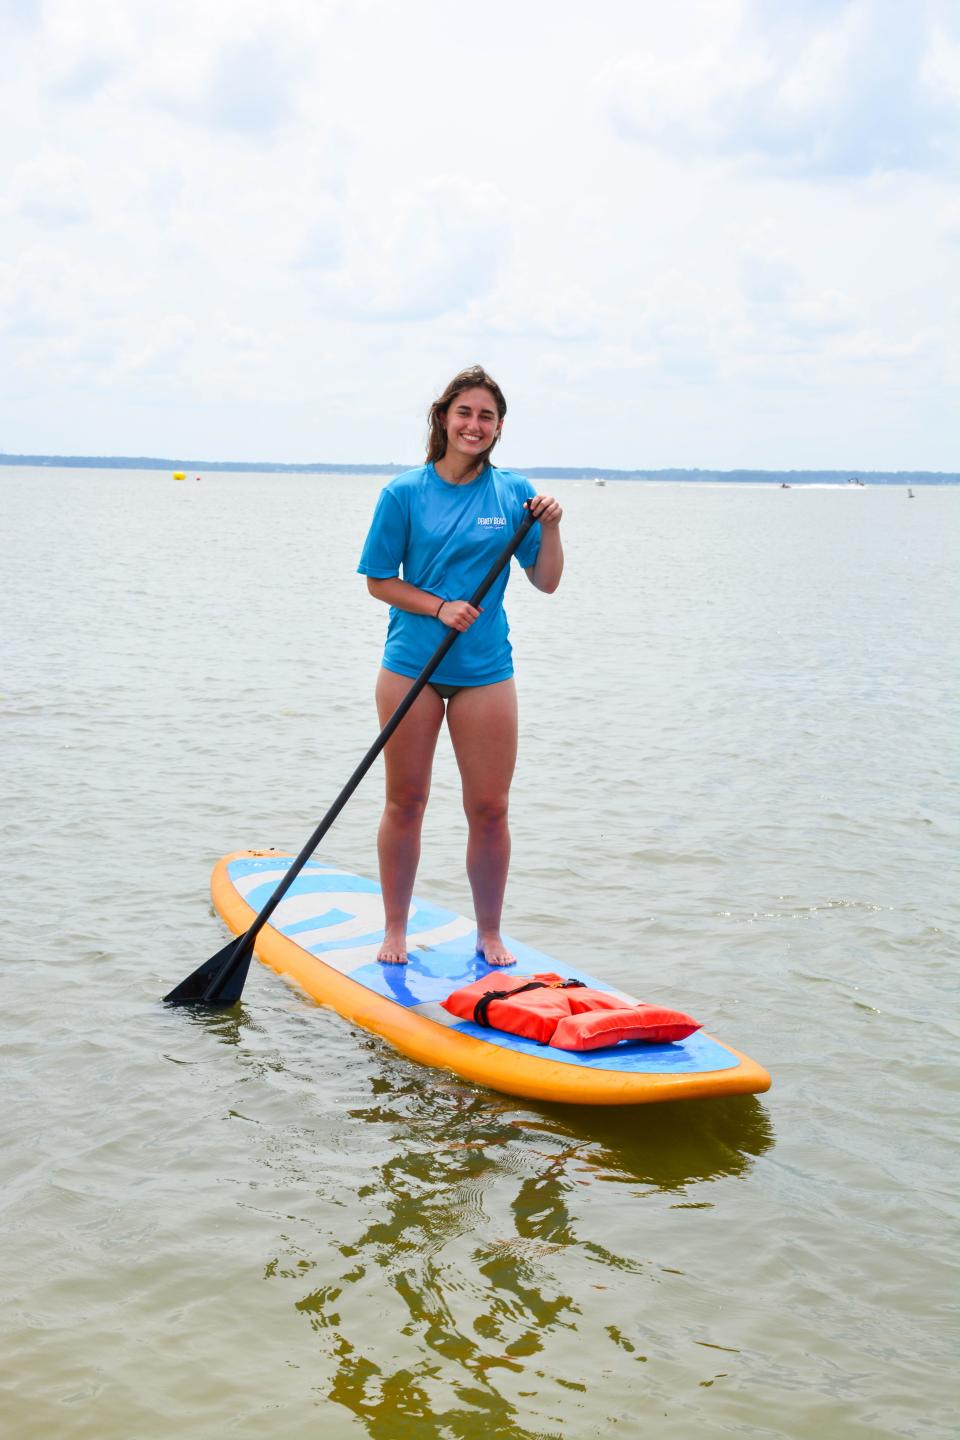 Dewey Beach Watersports also offers paddleboard and kayak rentals. (Photo provided by Dewey Beach Watersports)